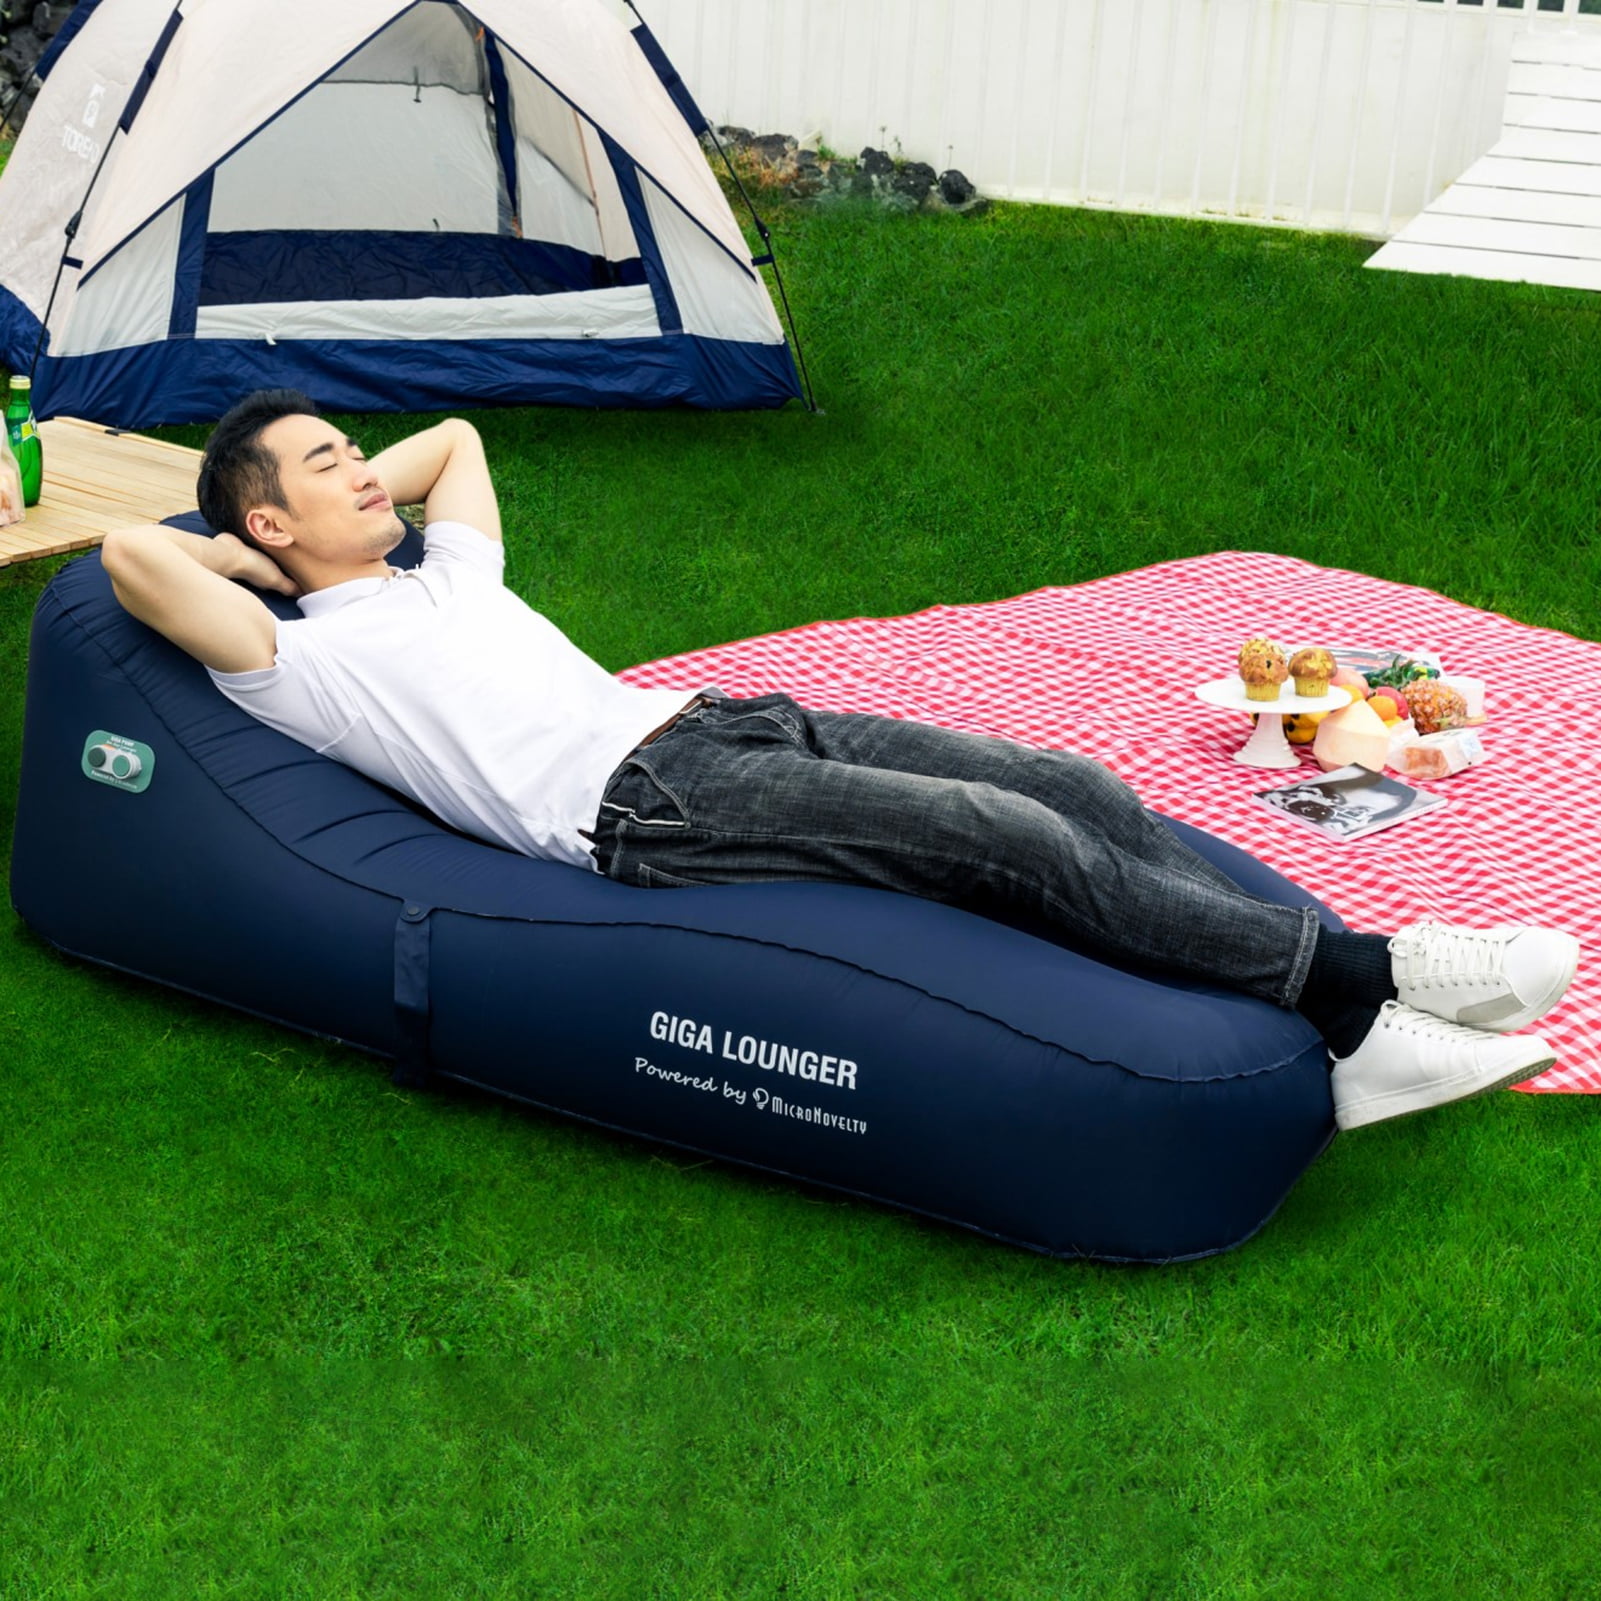 Outdoor and Indoor Fishing Garden Air Bed Anti-Air Leaking Waterproof  Inflatable Lounger Chair for Beach and Camping - China Outdoor Chair, Camping  Chair